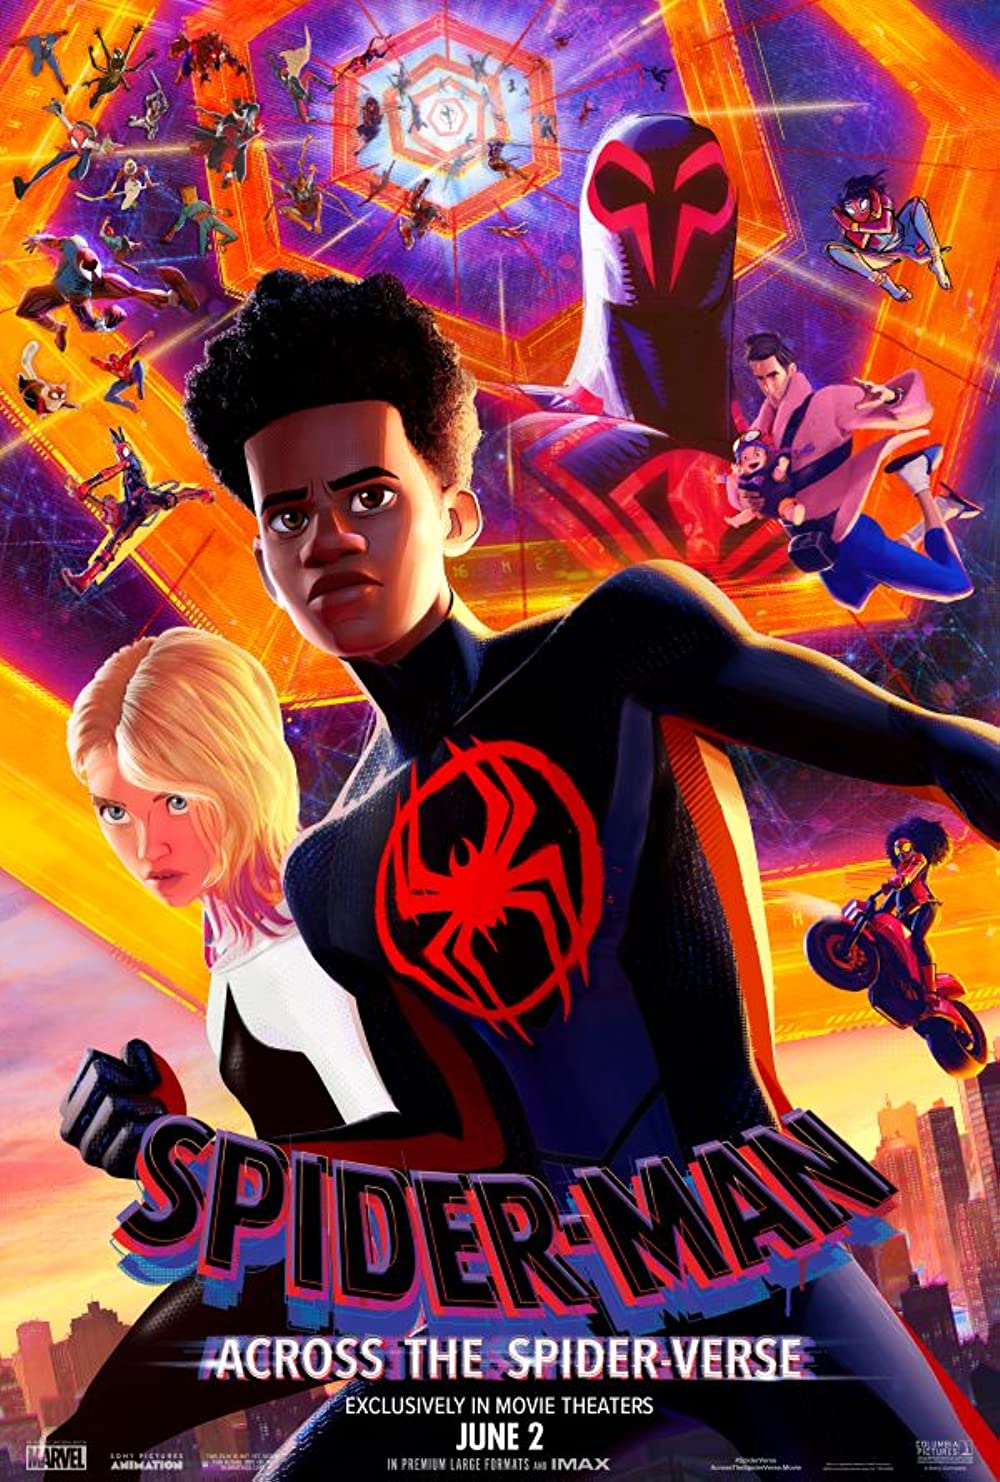 Spoilercast | Spider-Man Across the Spider-verse